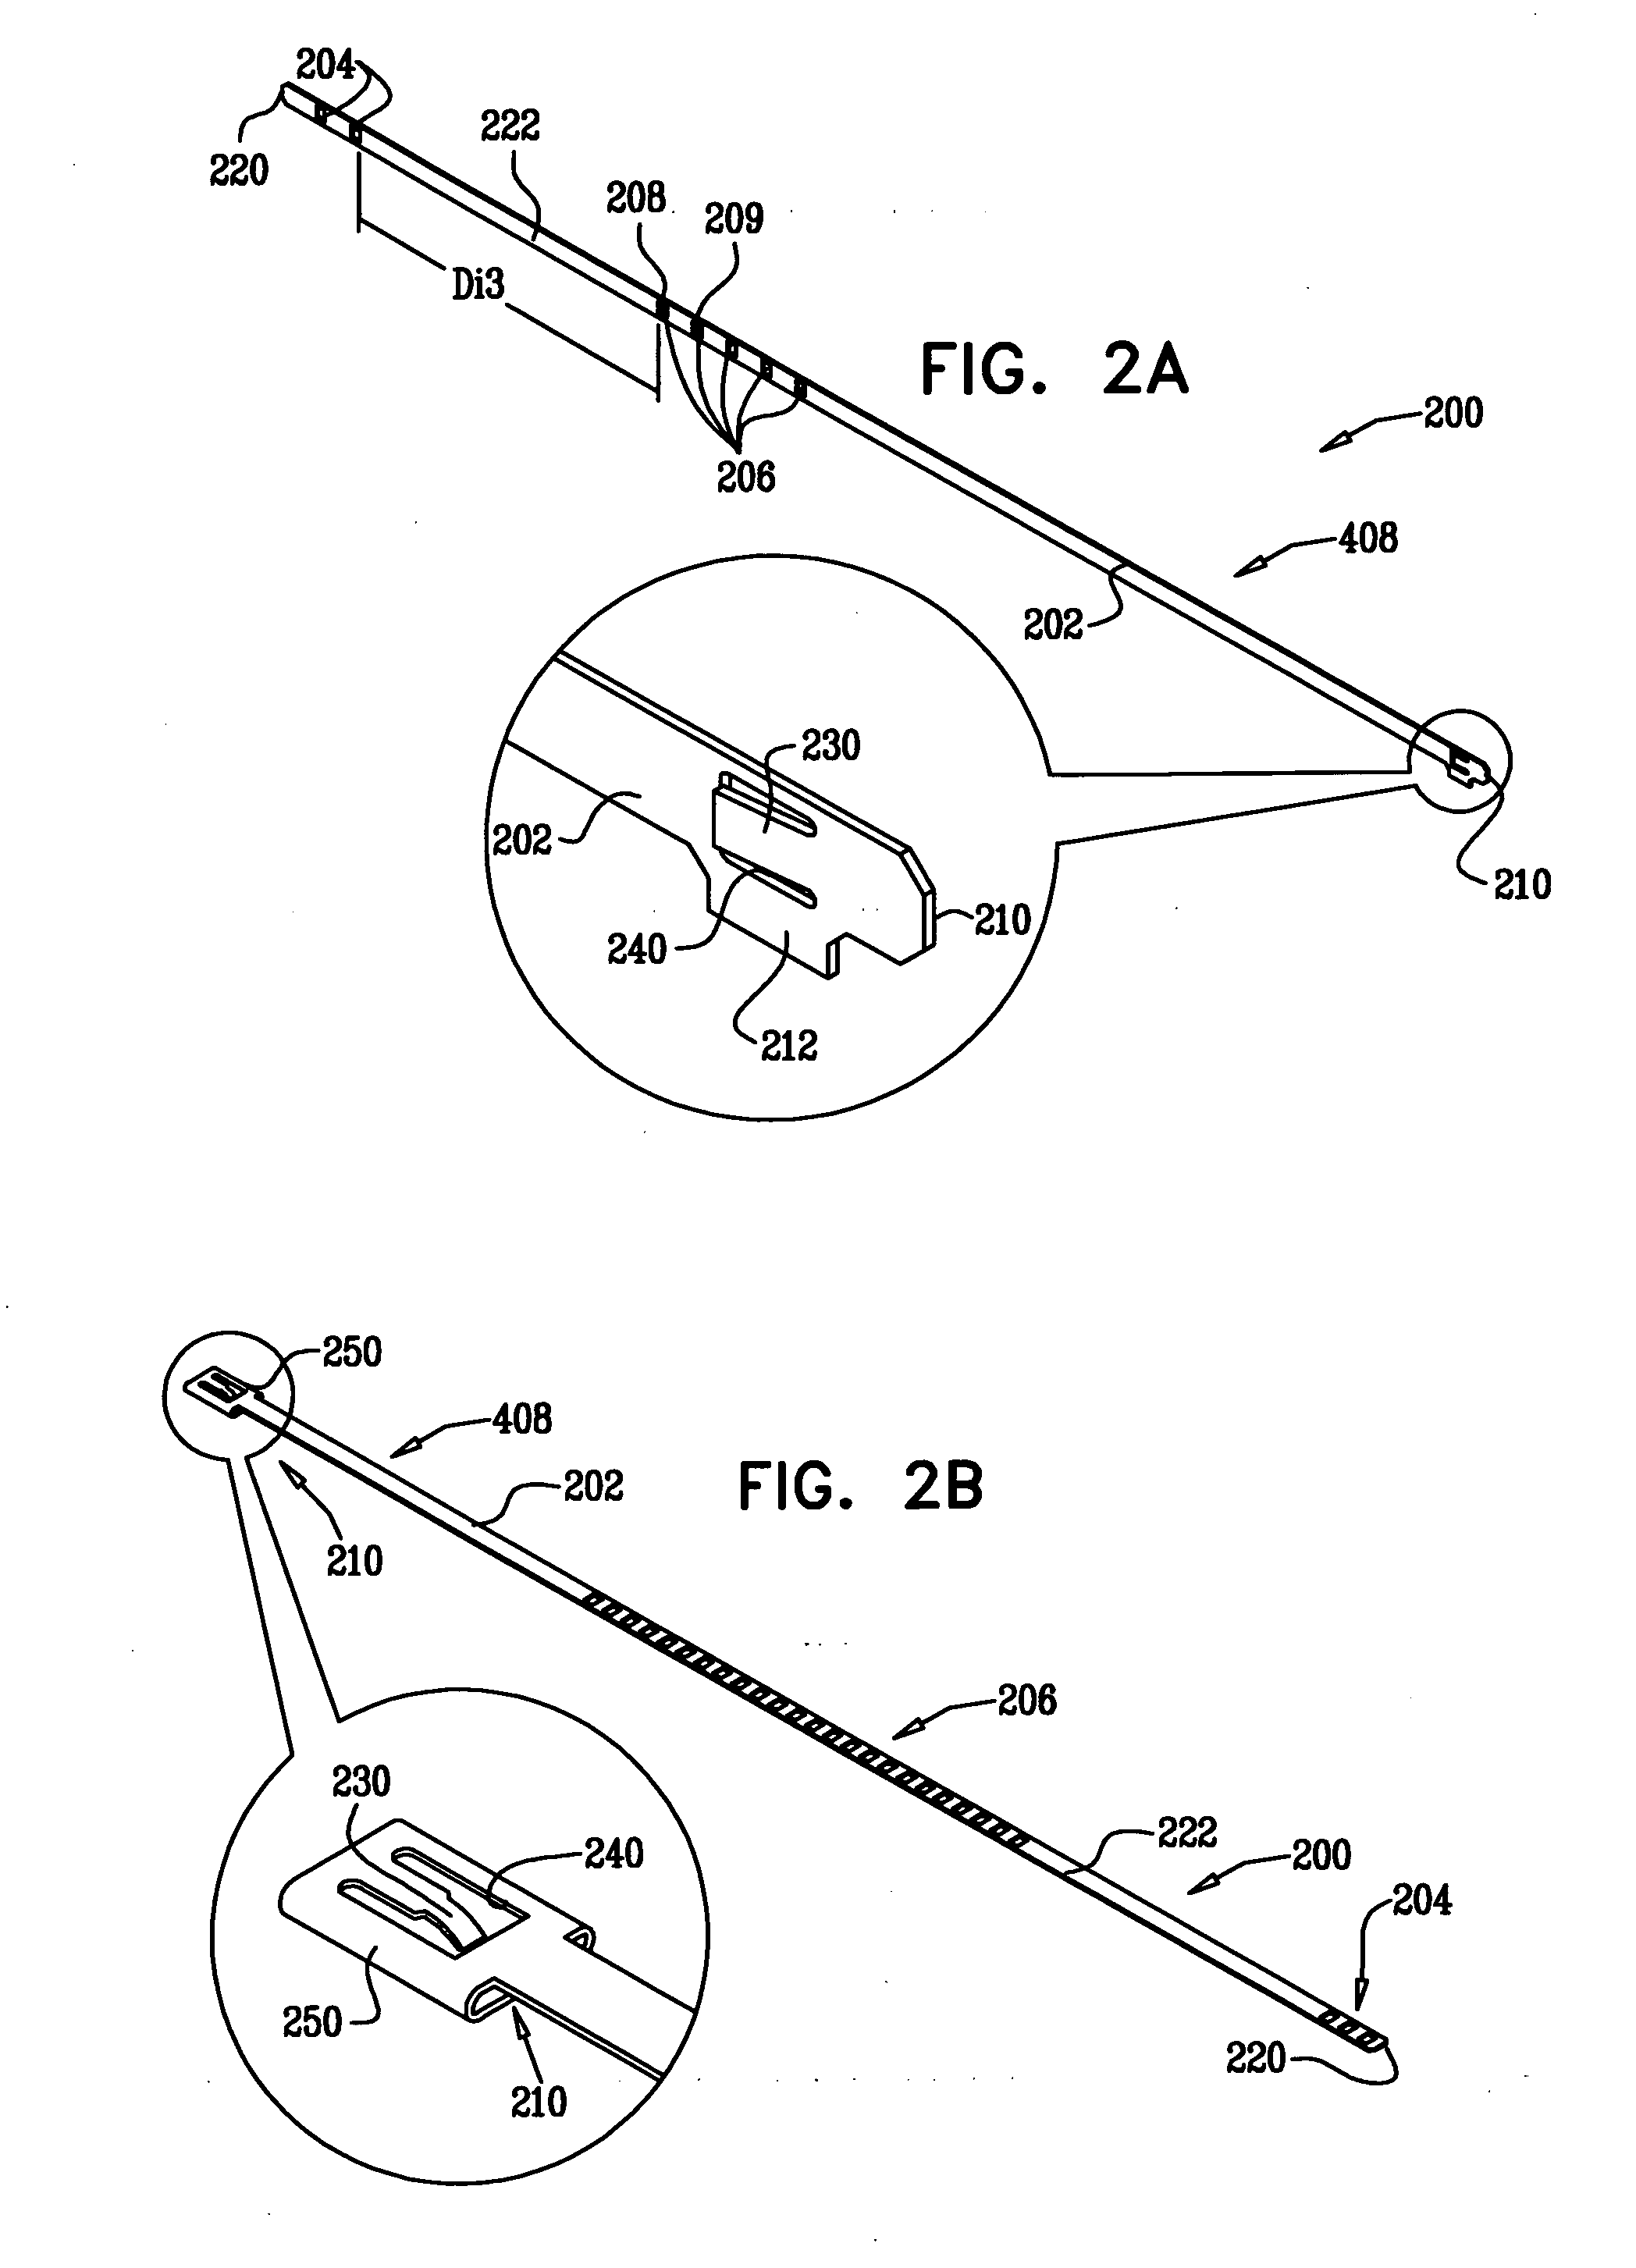 Annuloplasty devices and methods of deliver therefor